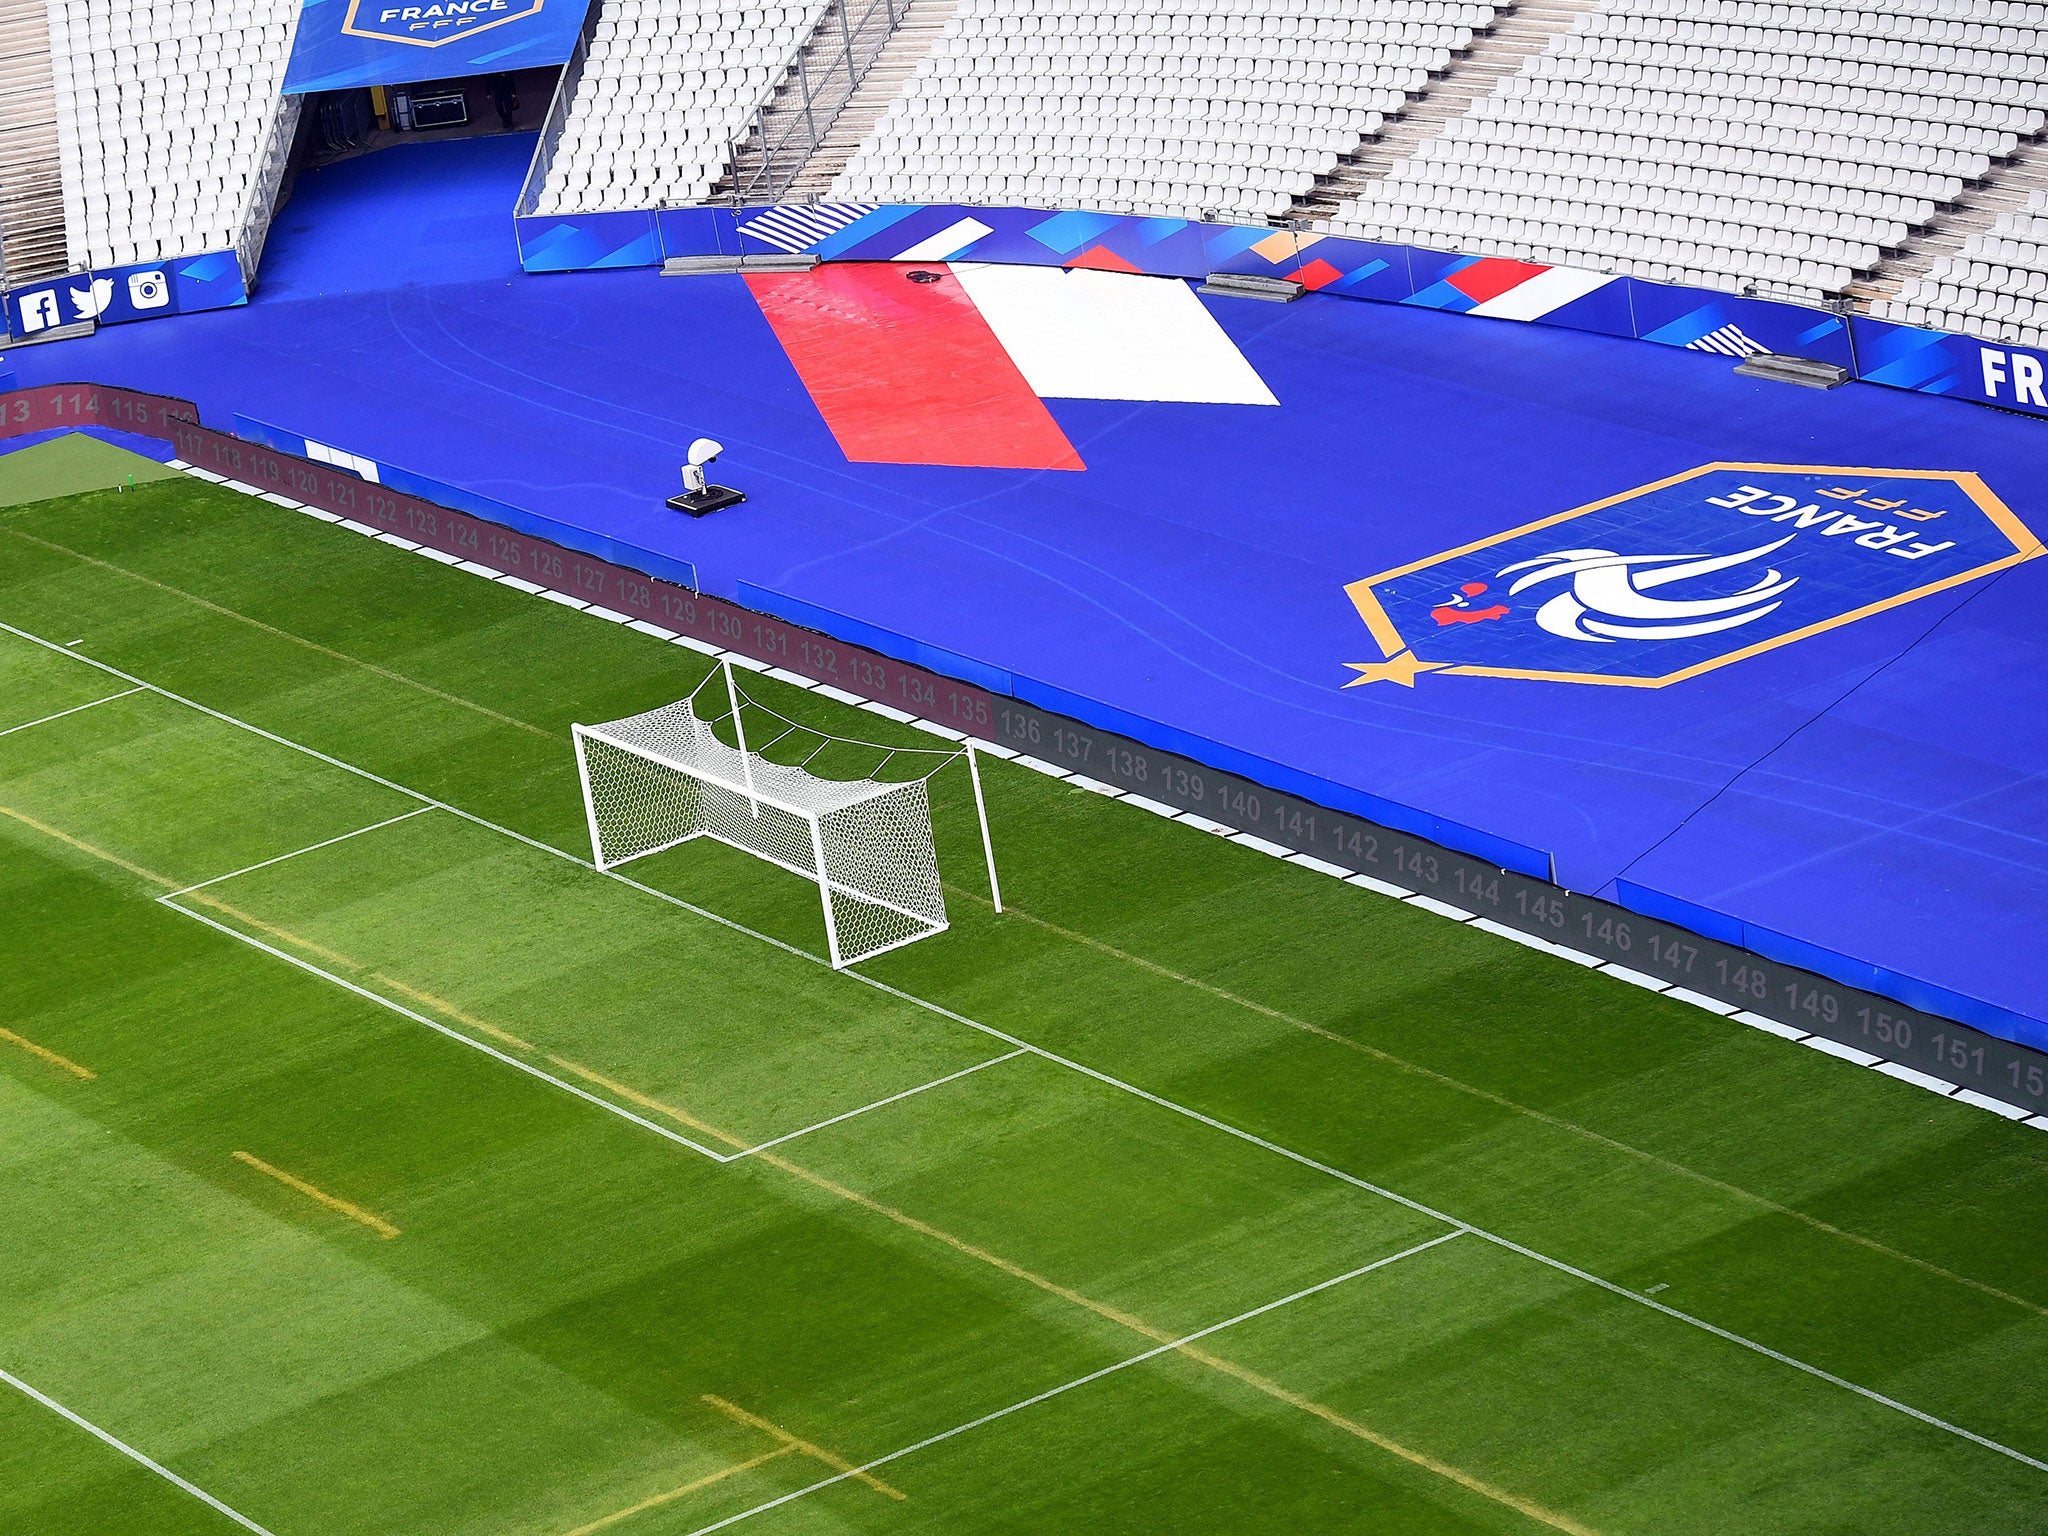 A view of the Stade de France which hosts the first game